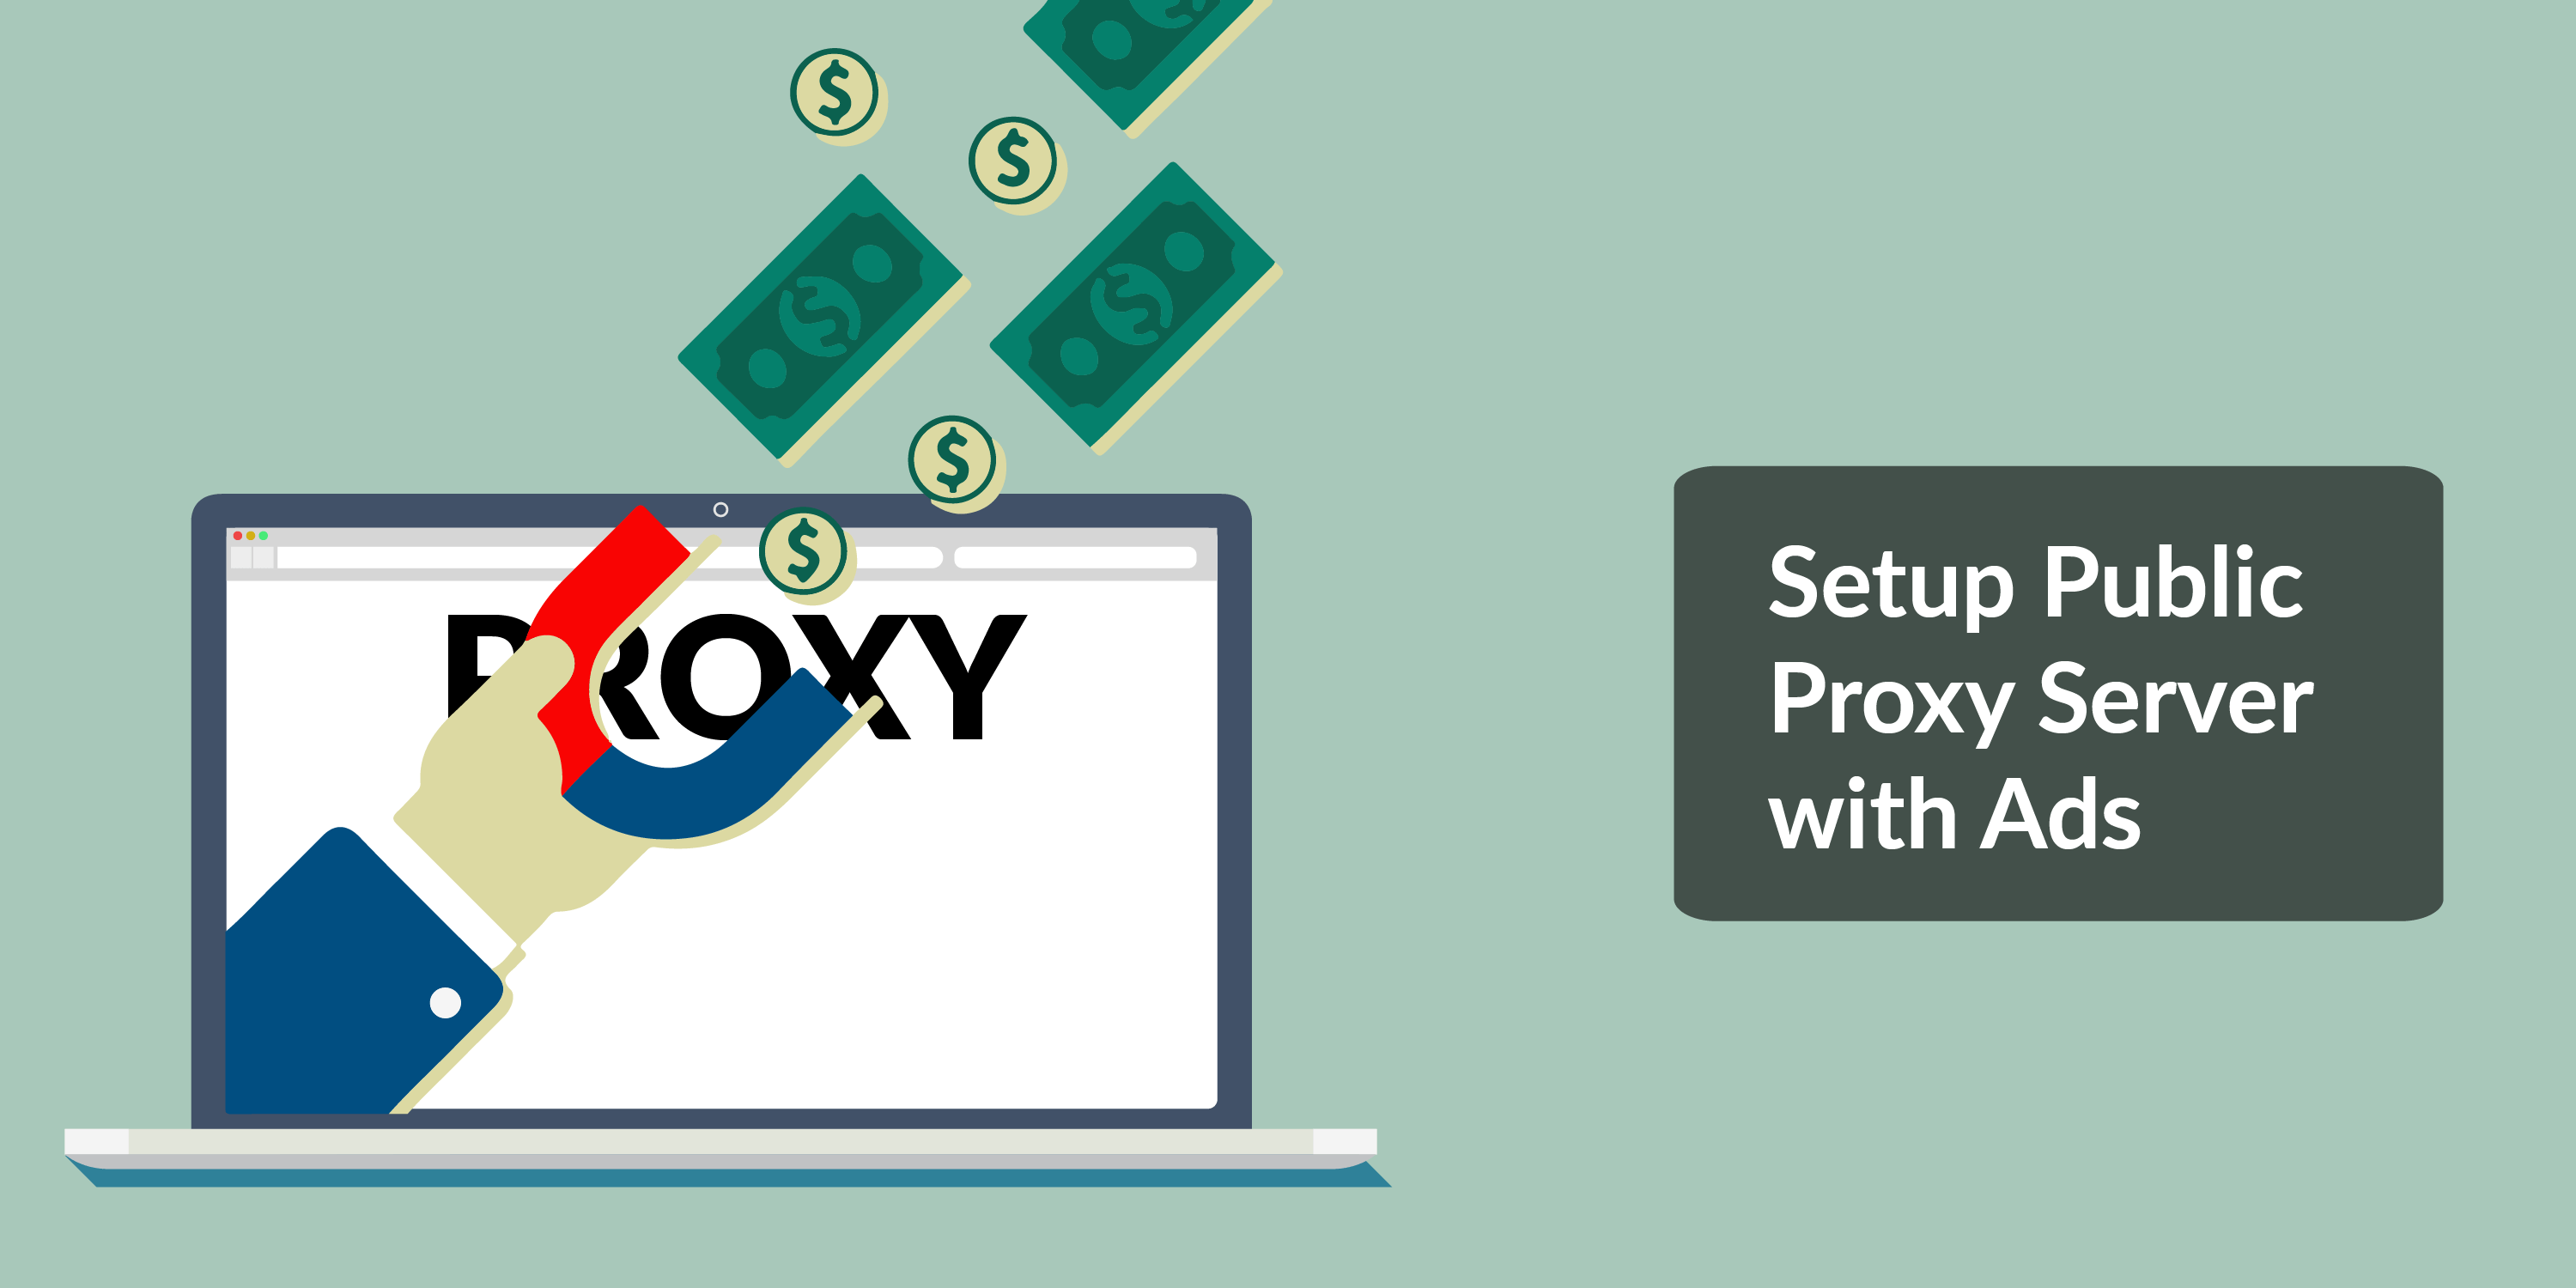 make money with proxies by SETTING UP PUBLIC PROXY SERVER WITH ADS